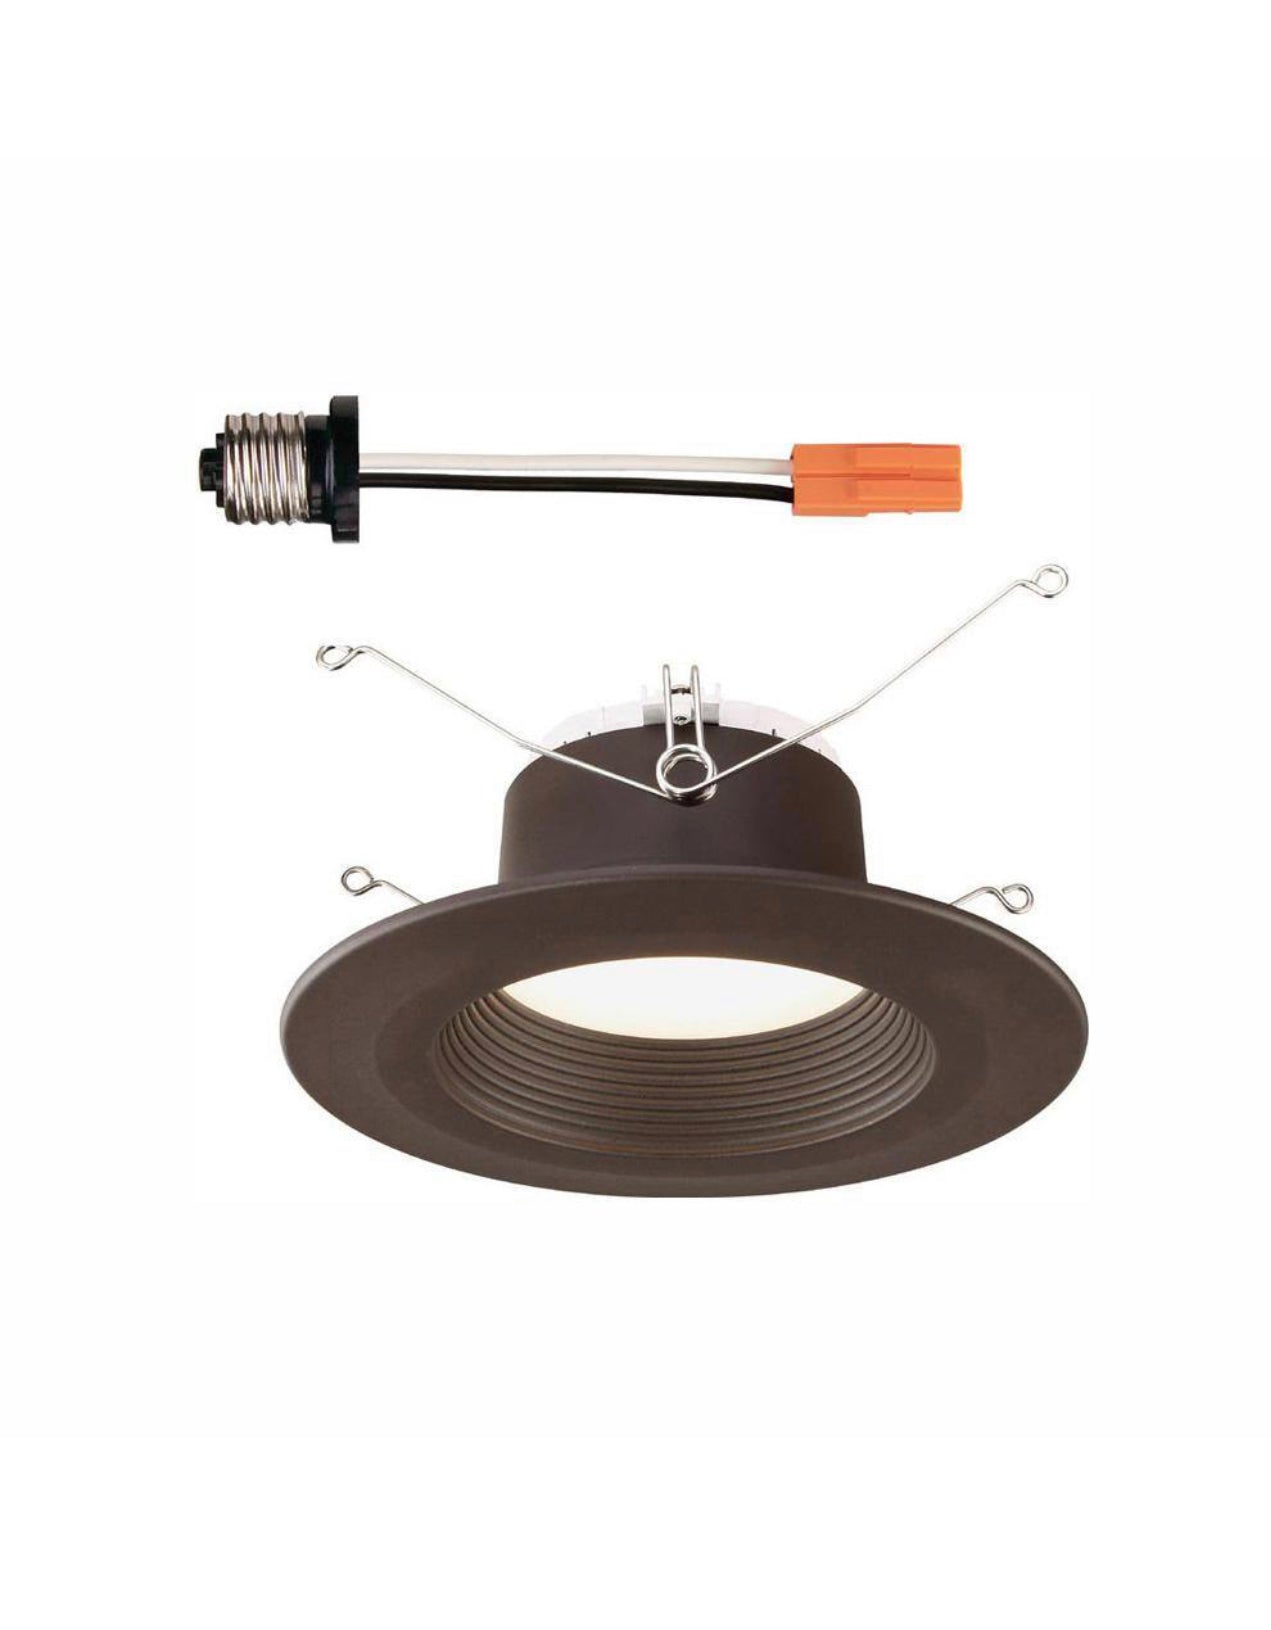 Envirolite 5 in./6 in. 3000K Soft White Integrated LED Recessed CEC-T20 Baffle Trim in Bronze Damaged Box